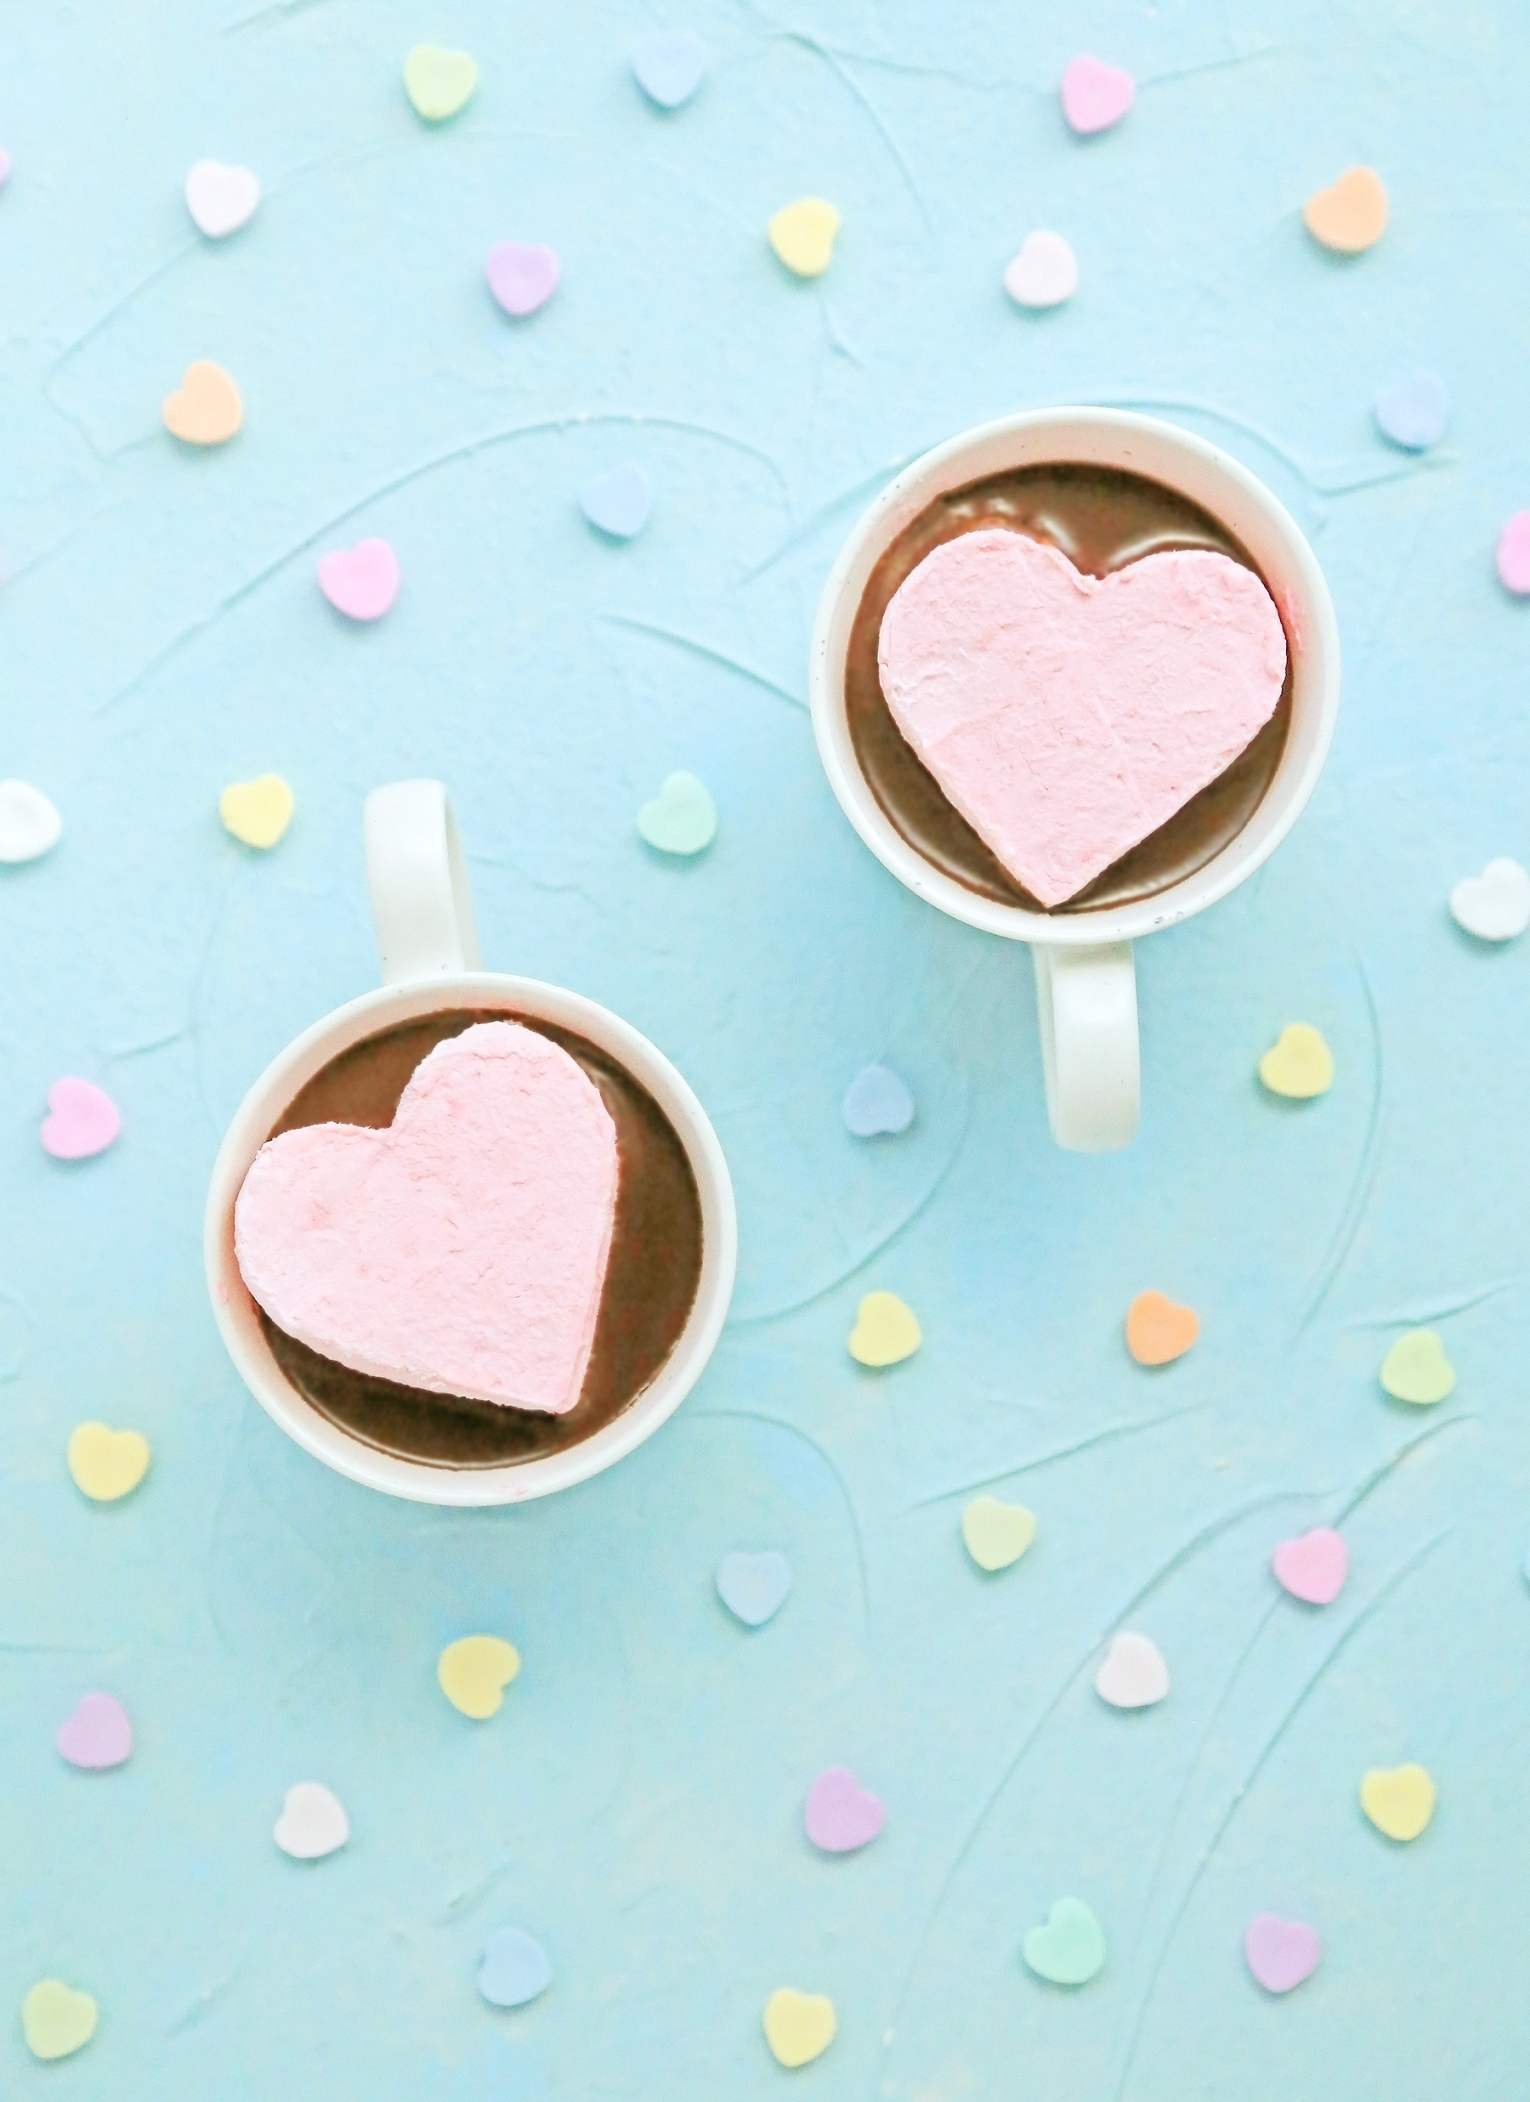 https://www.thecomfortofcooking.com/wp-content/uploads/2022/02/Whipped_Cream_Heart_Toppers-a.jpg